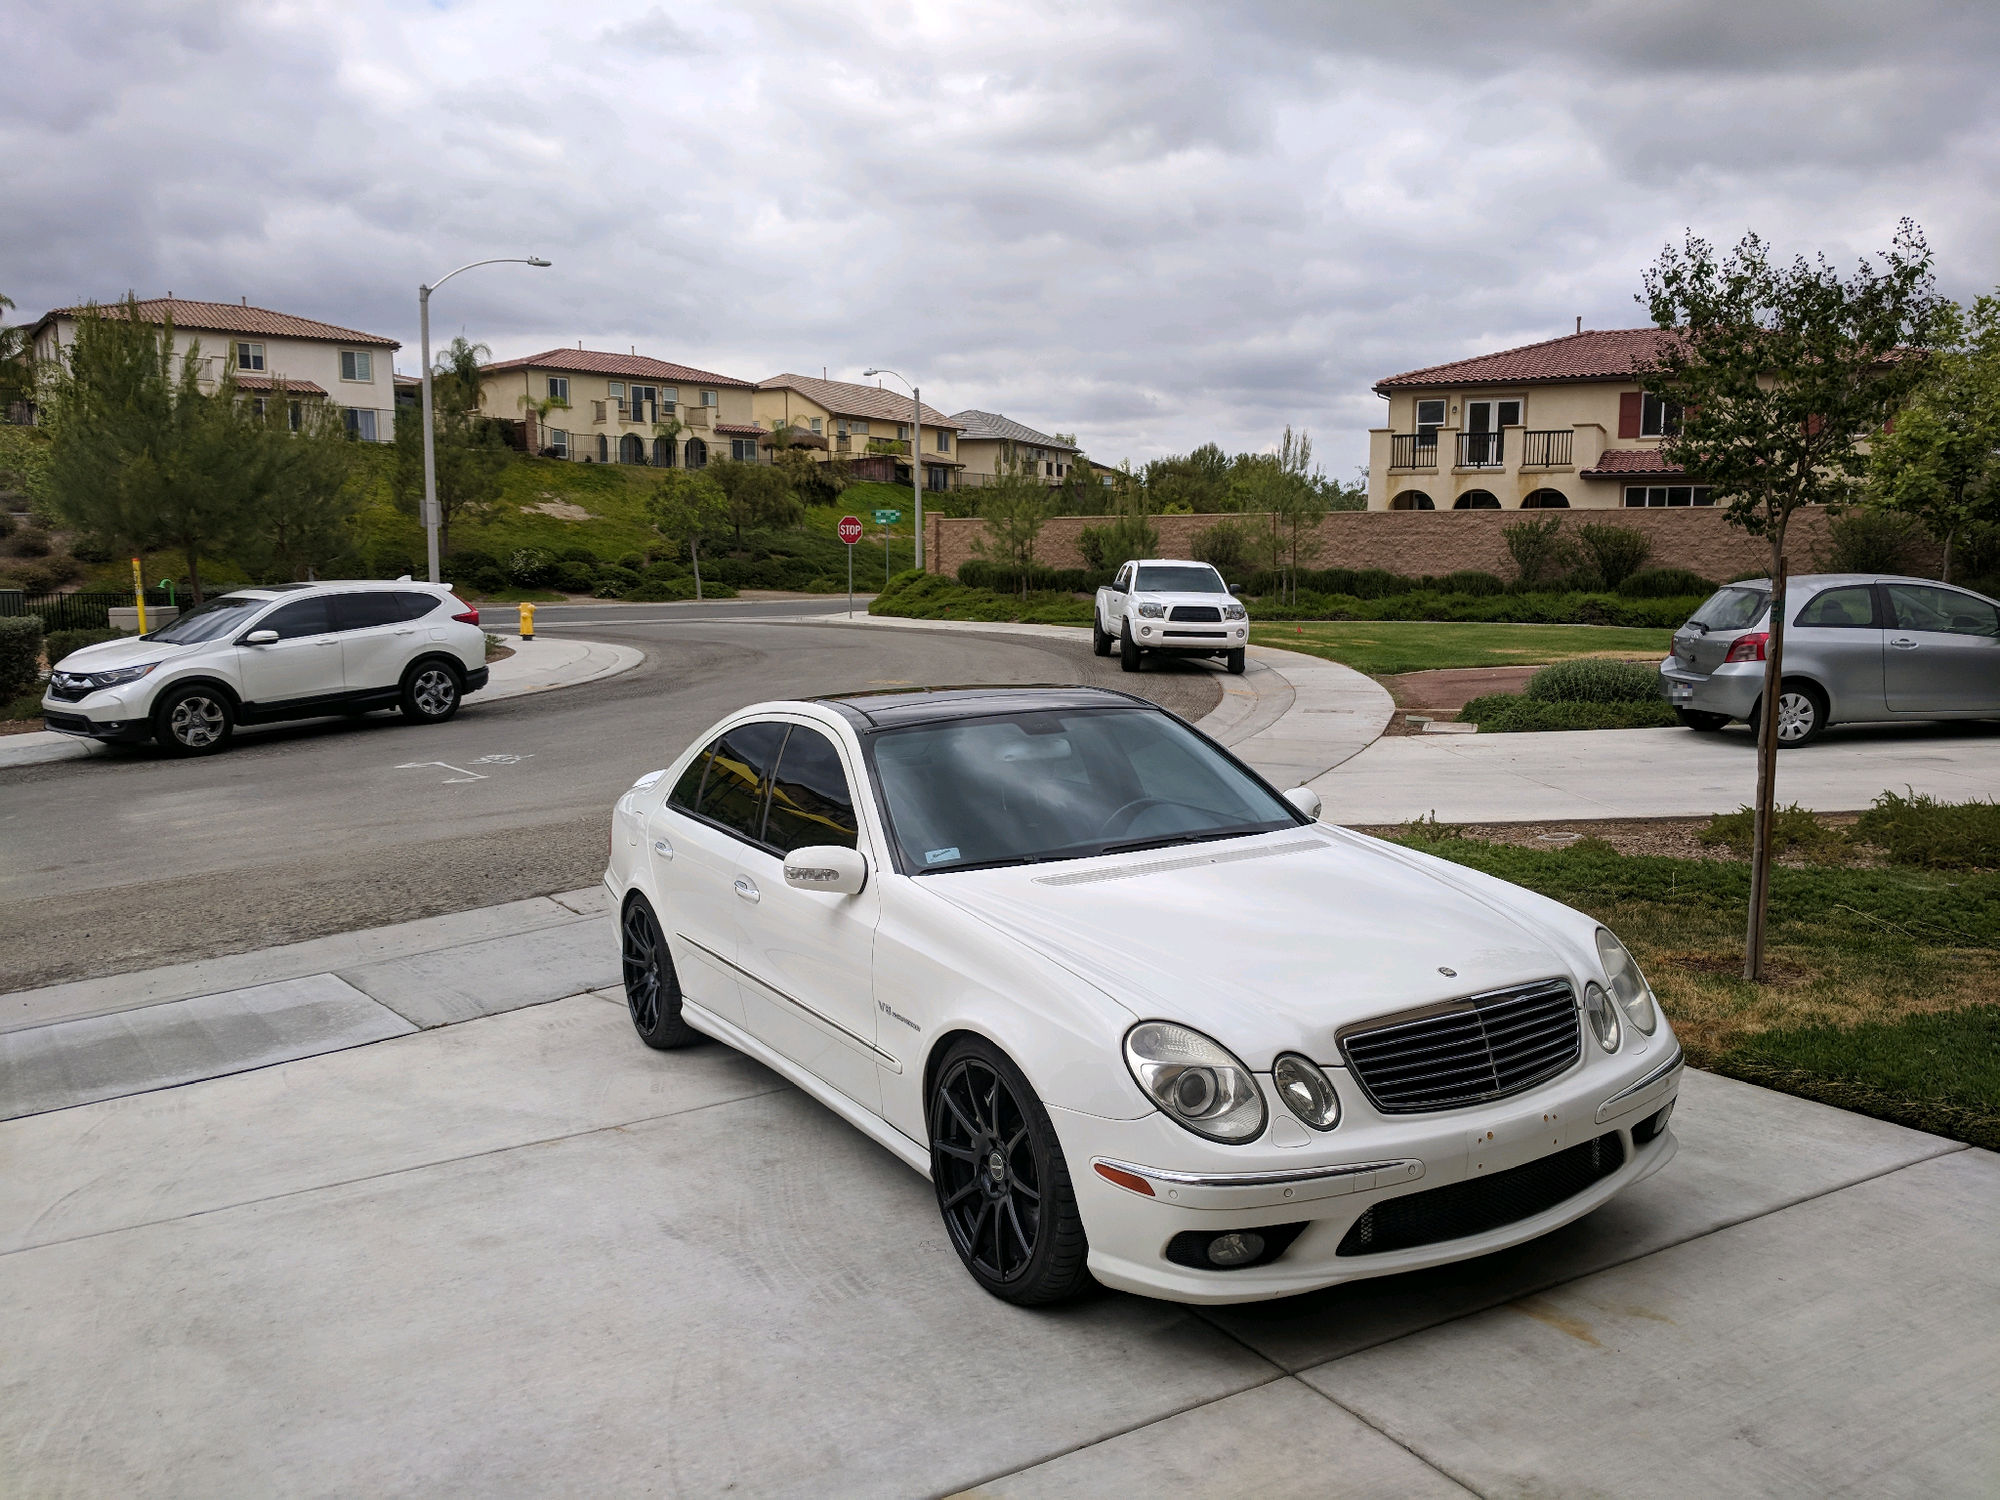 2005 Mercedes-Benz E55 AMG - 2005 Mercedes Benz E55 AMG - Used - VIN WDBUF76J45A758321 - 173,000 Miles - 8 cyl - 2WD - Automatic - Sedan - White - Riverside, CA 92503, United States